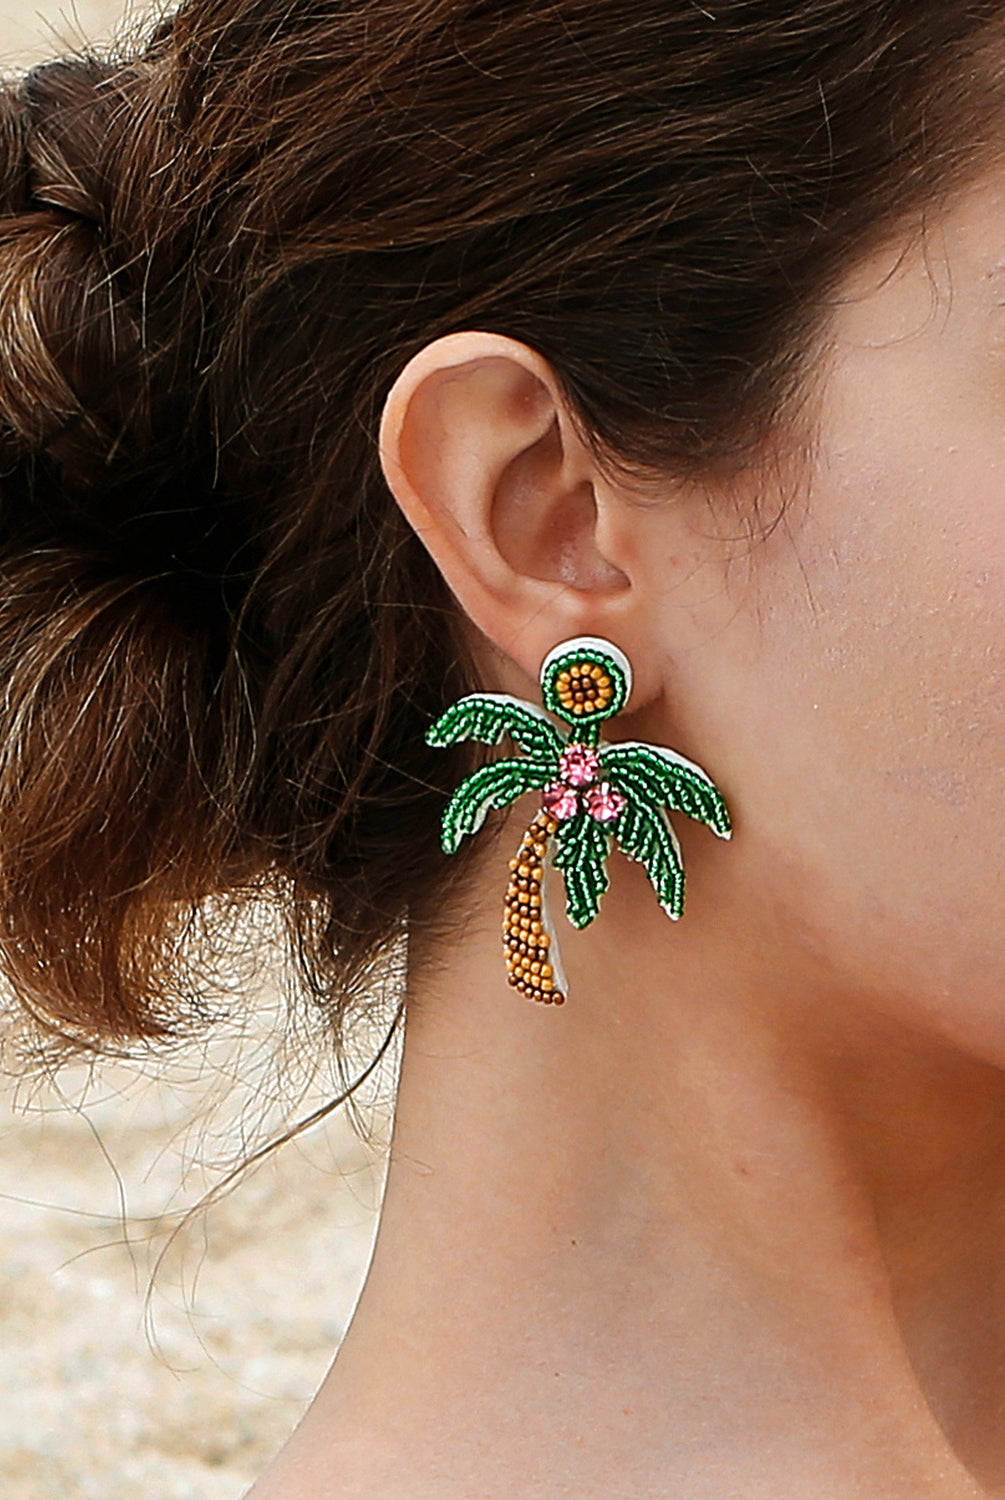 A woman exudes island grace with her stunning coconut tree beaded earrings, complementing her relaxed, seaside style with a touch of tropical elegance.